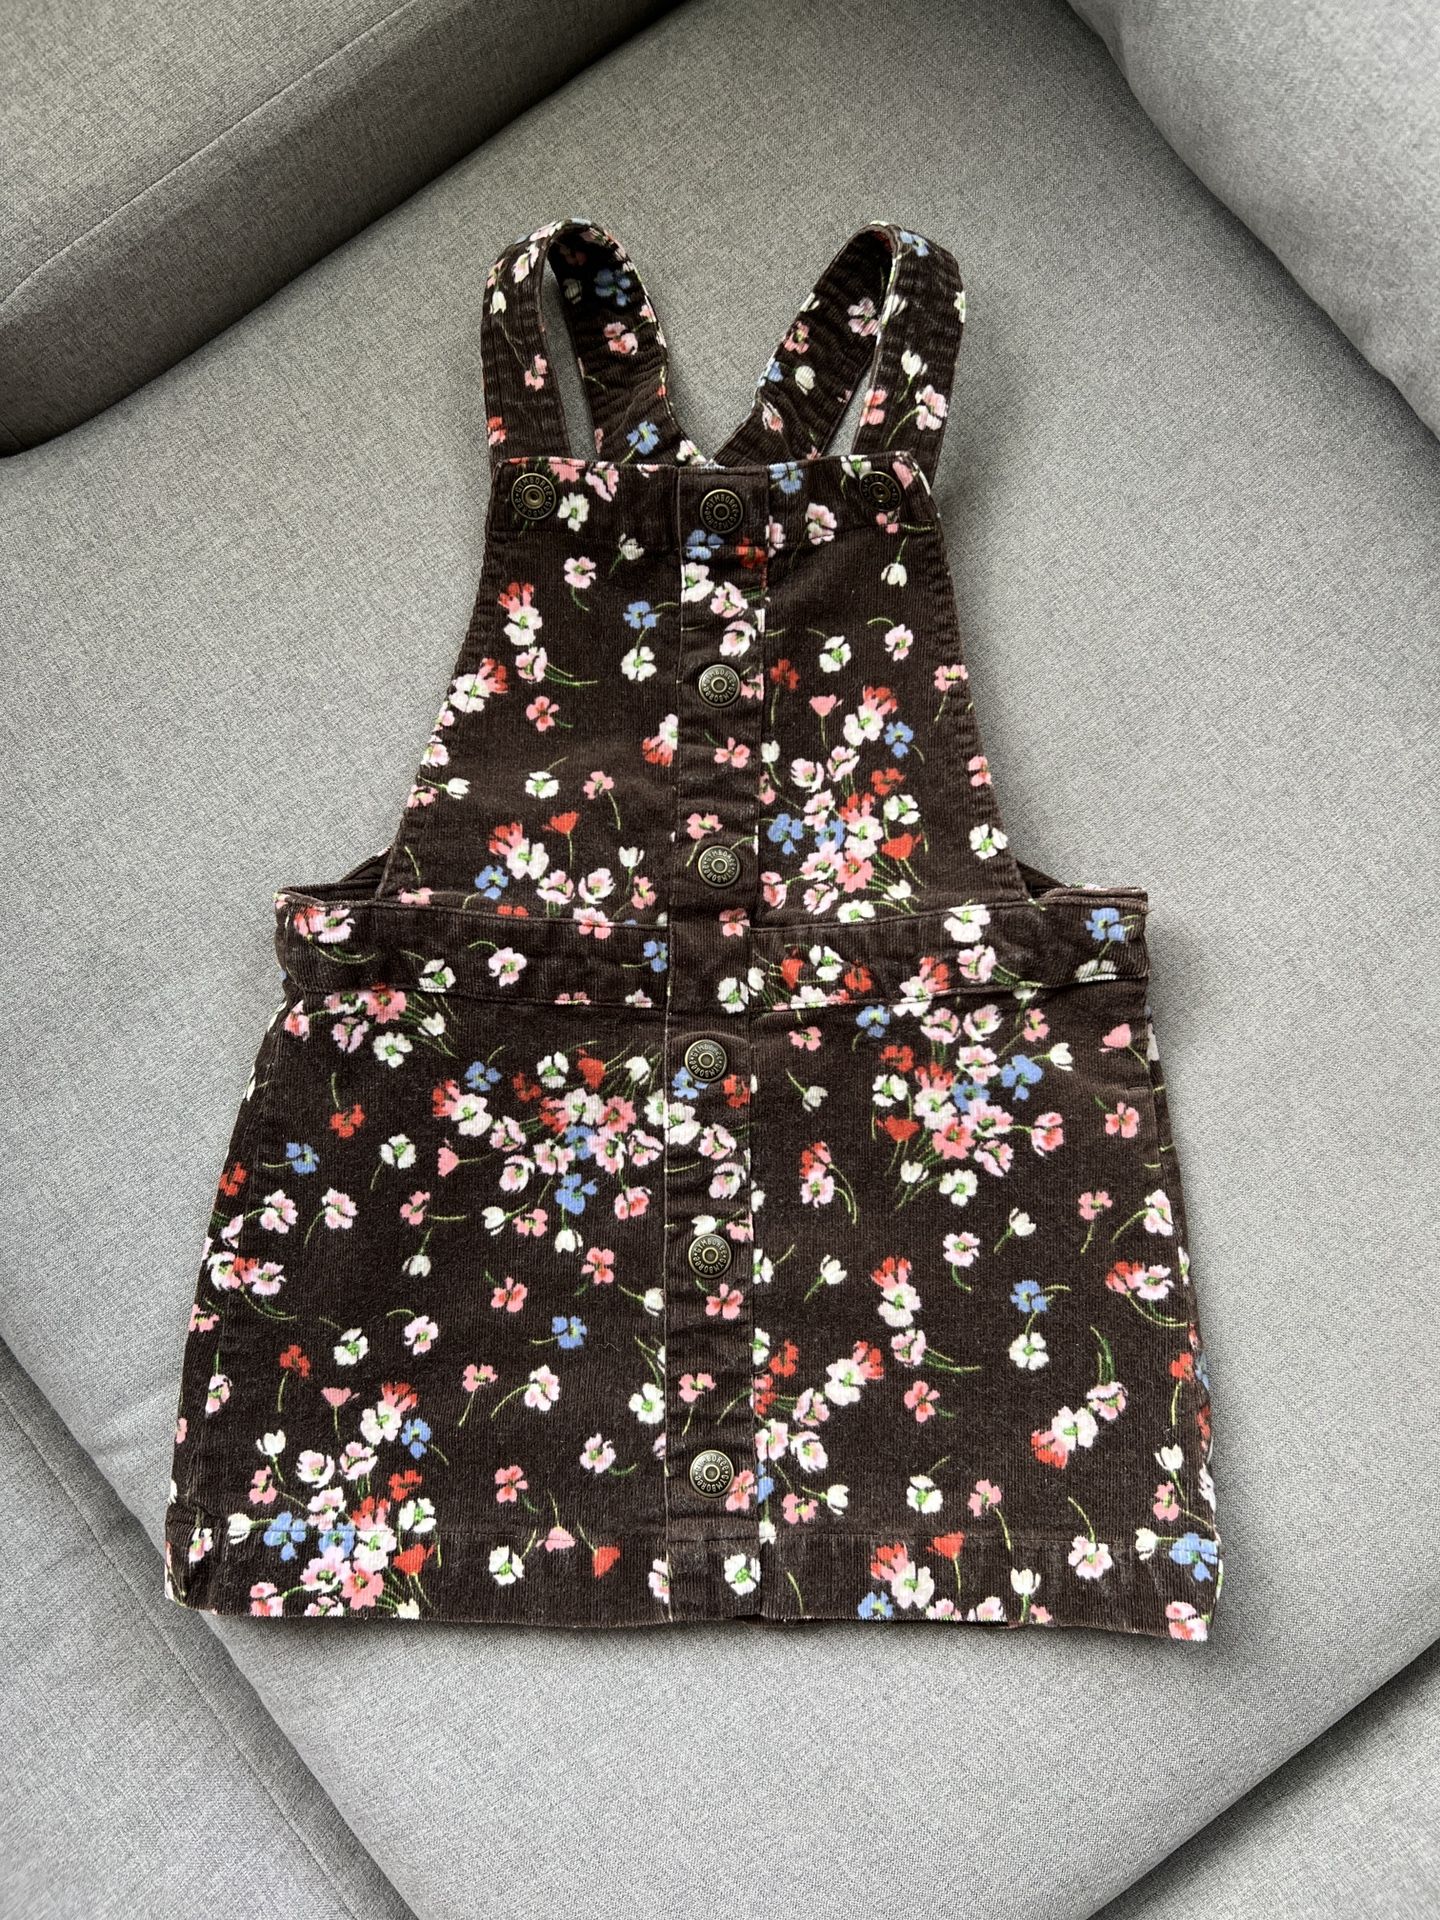 Toddler Overall Dress 3T